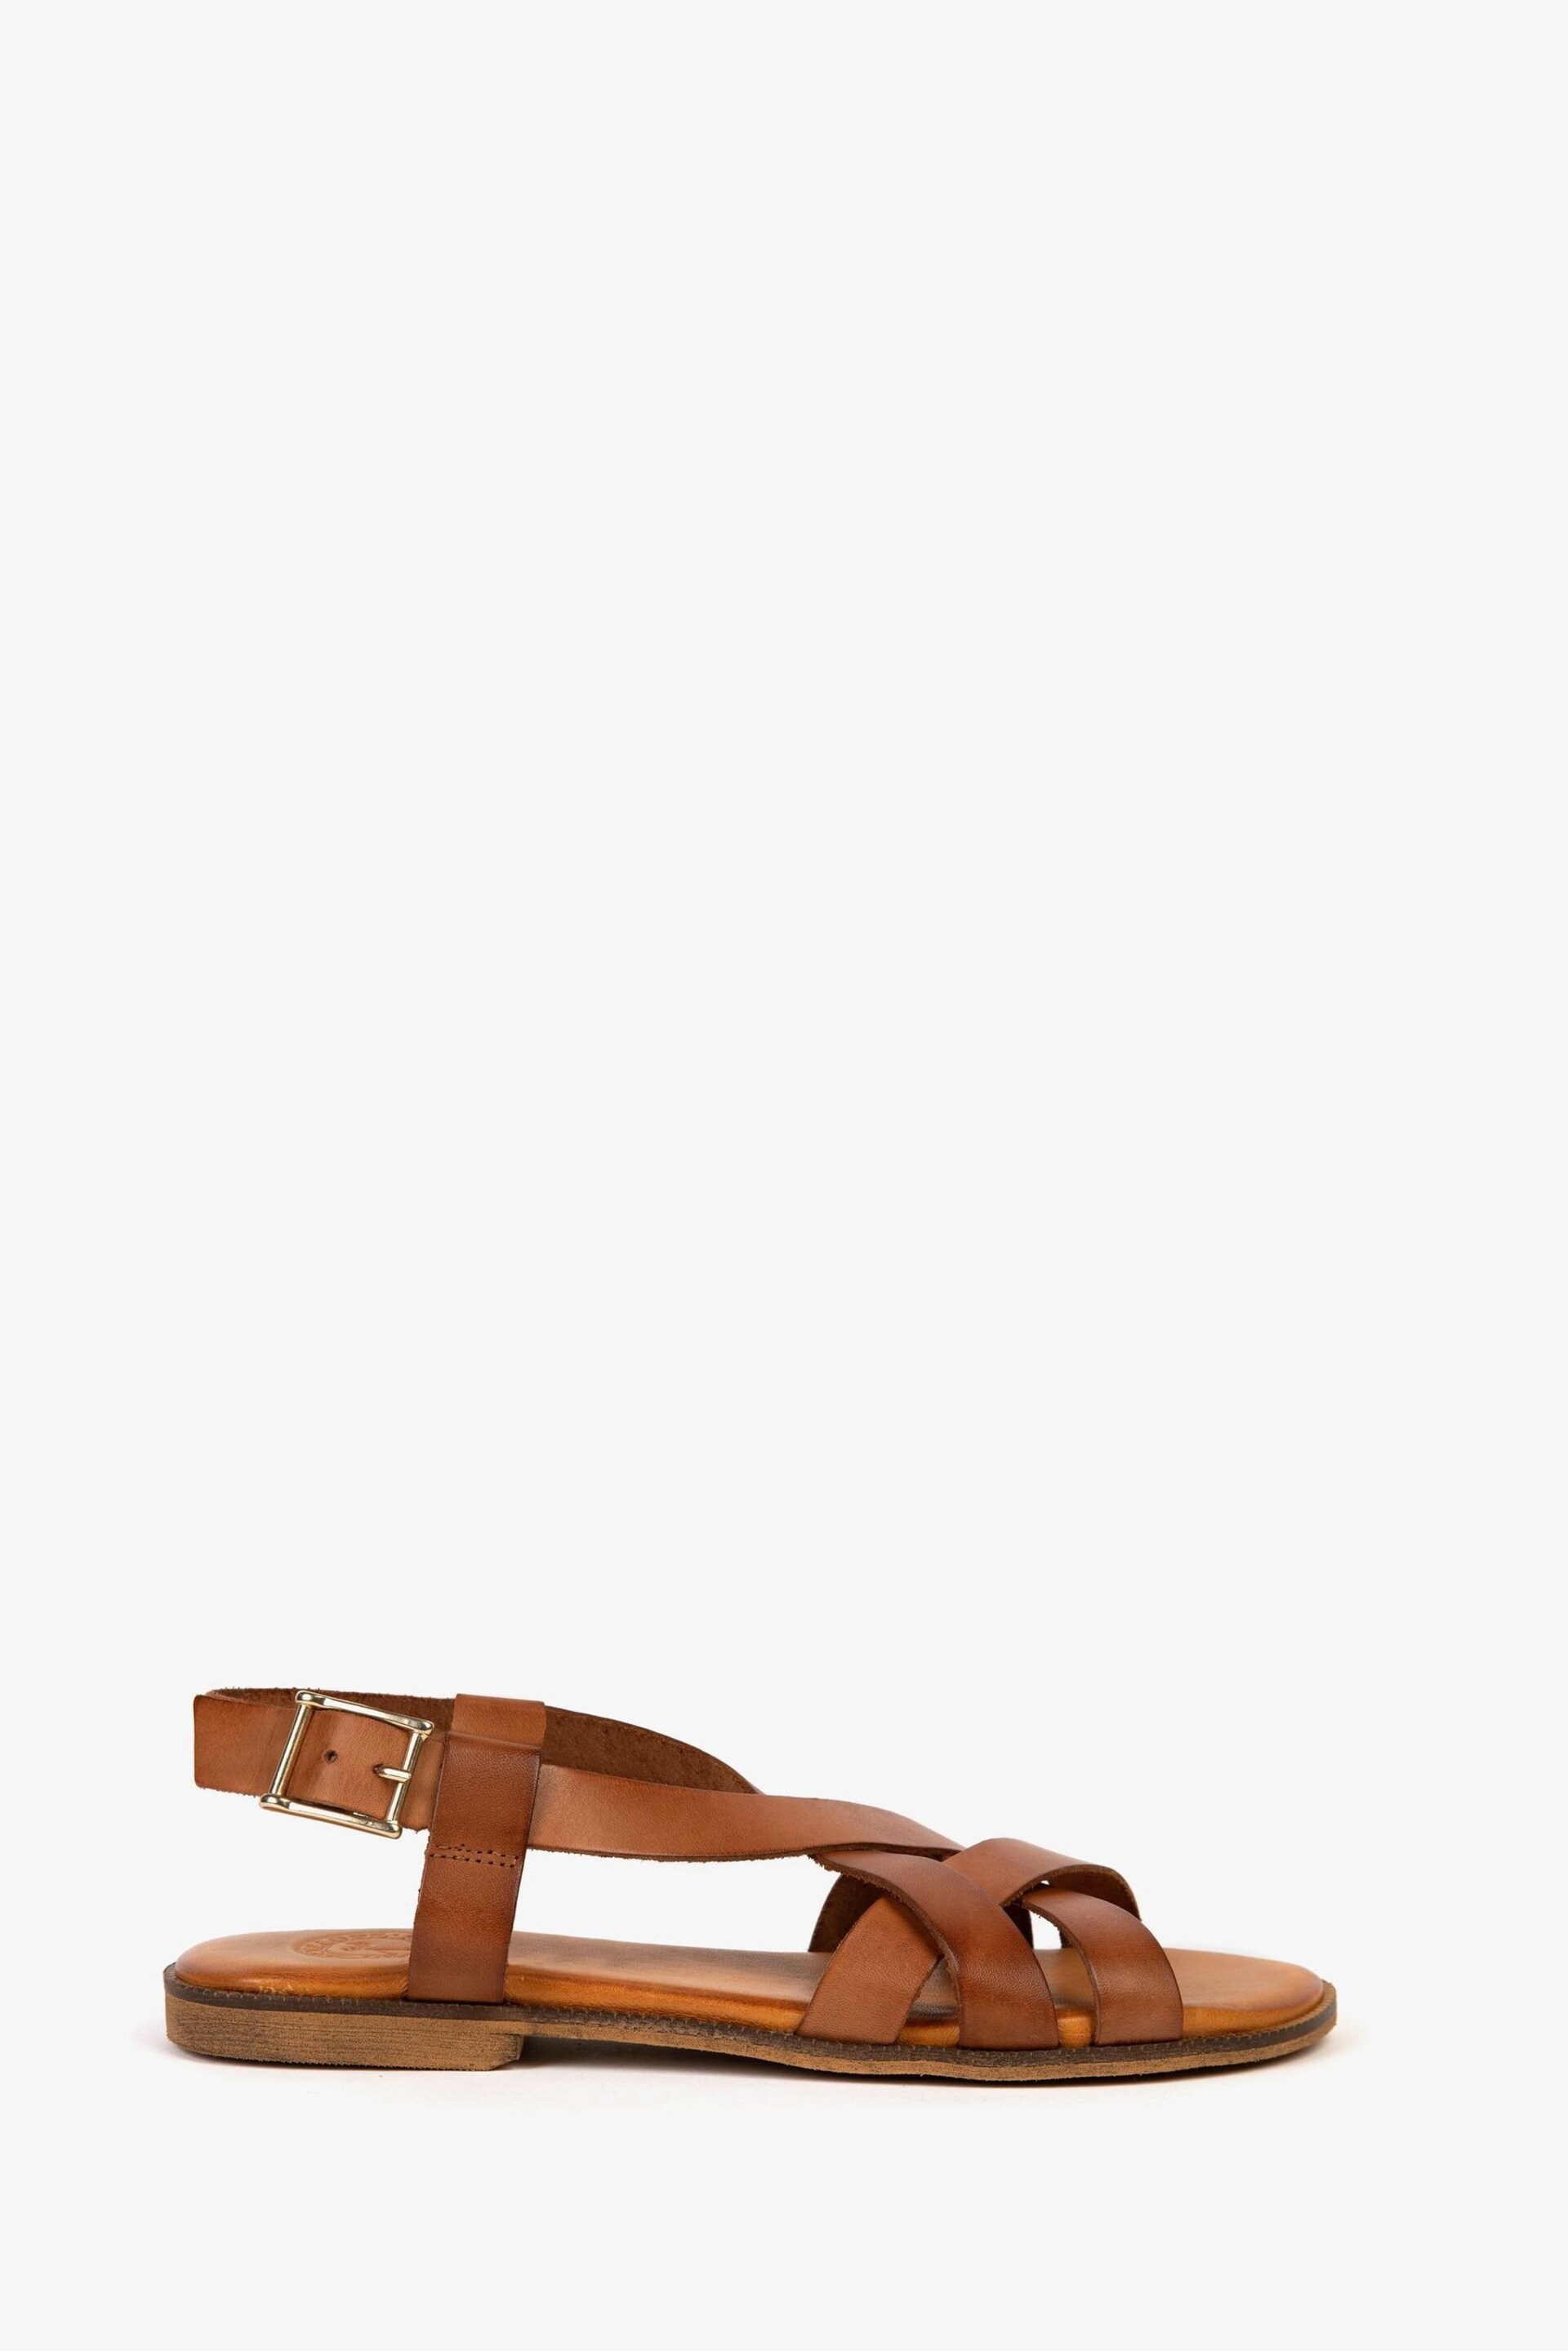 Penelope Chilvers Buttercup Brown Leather Sandals - Image 1 of 5